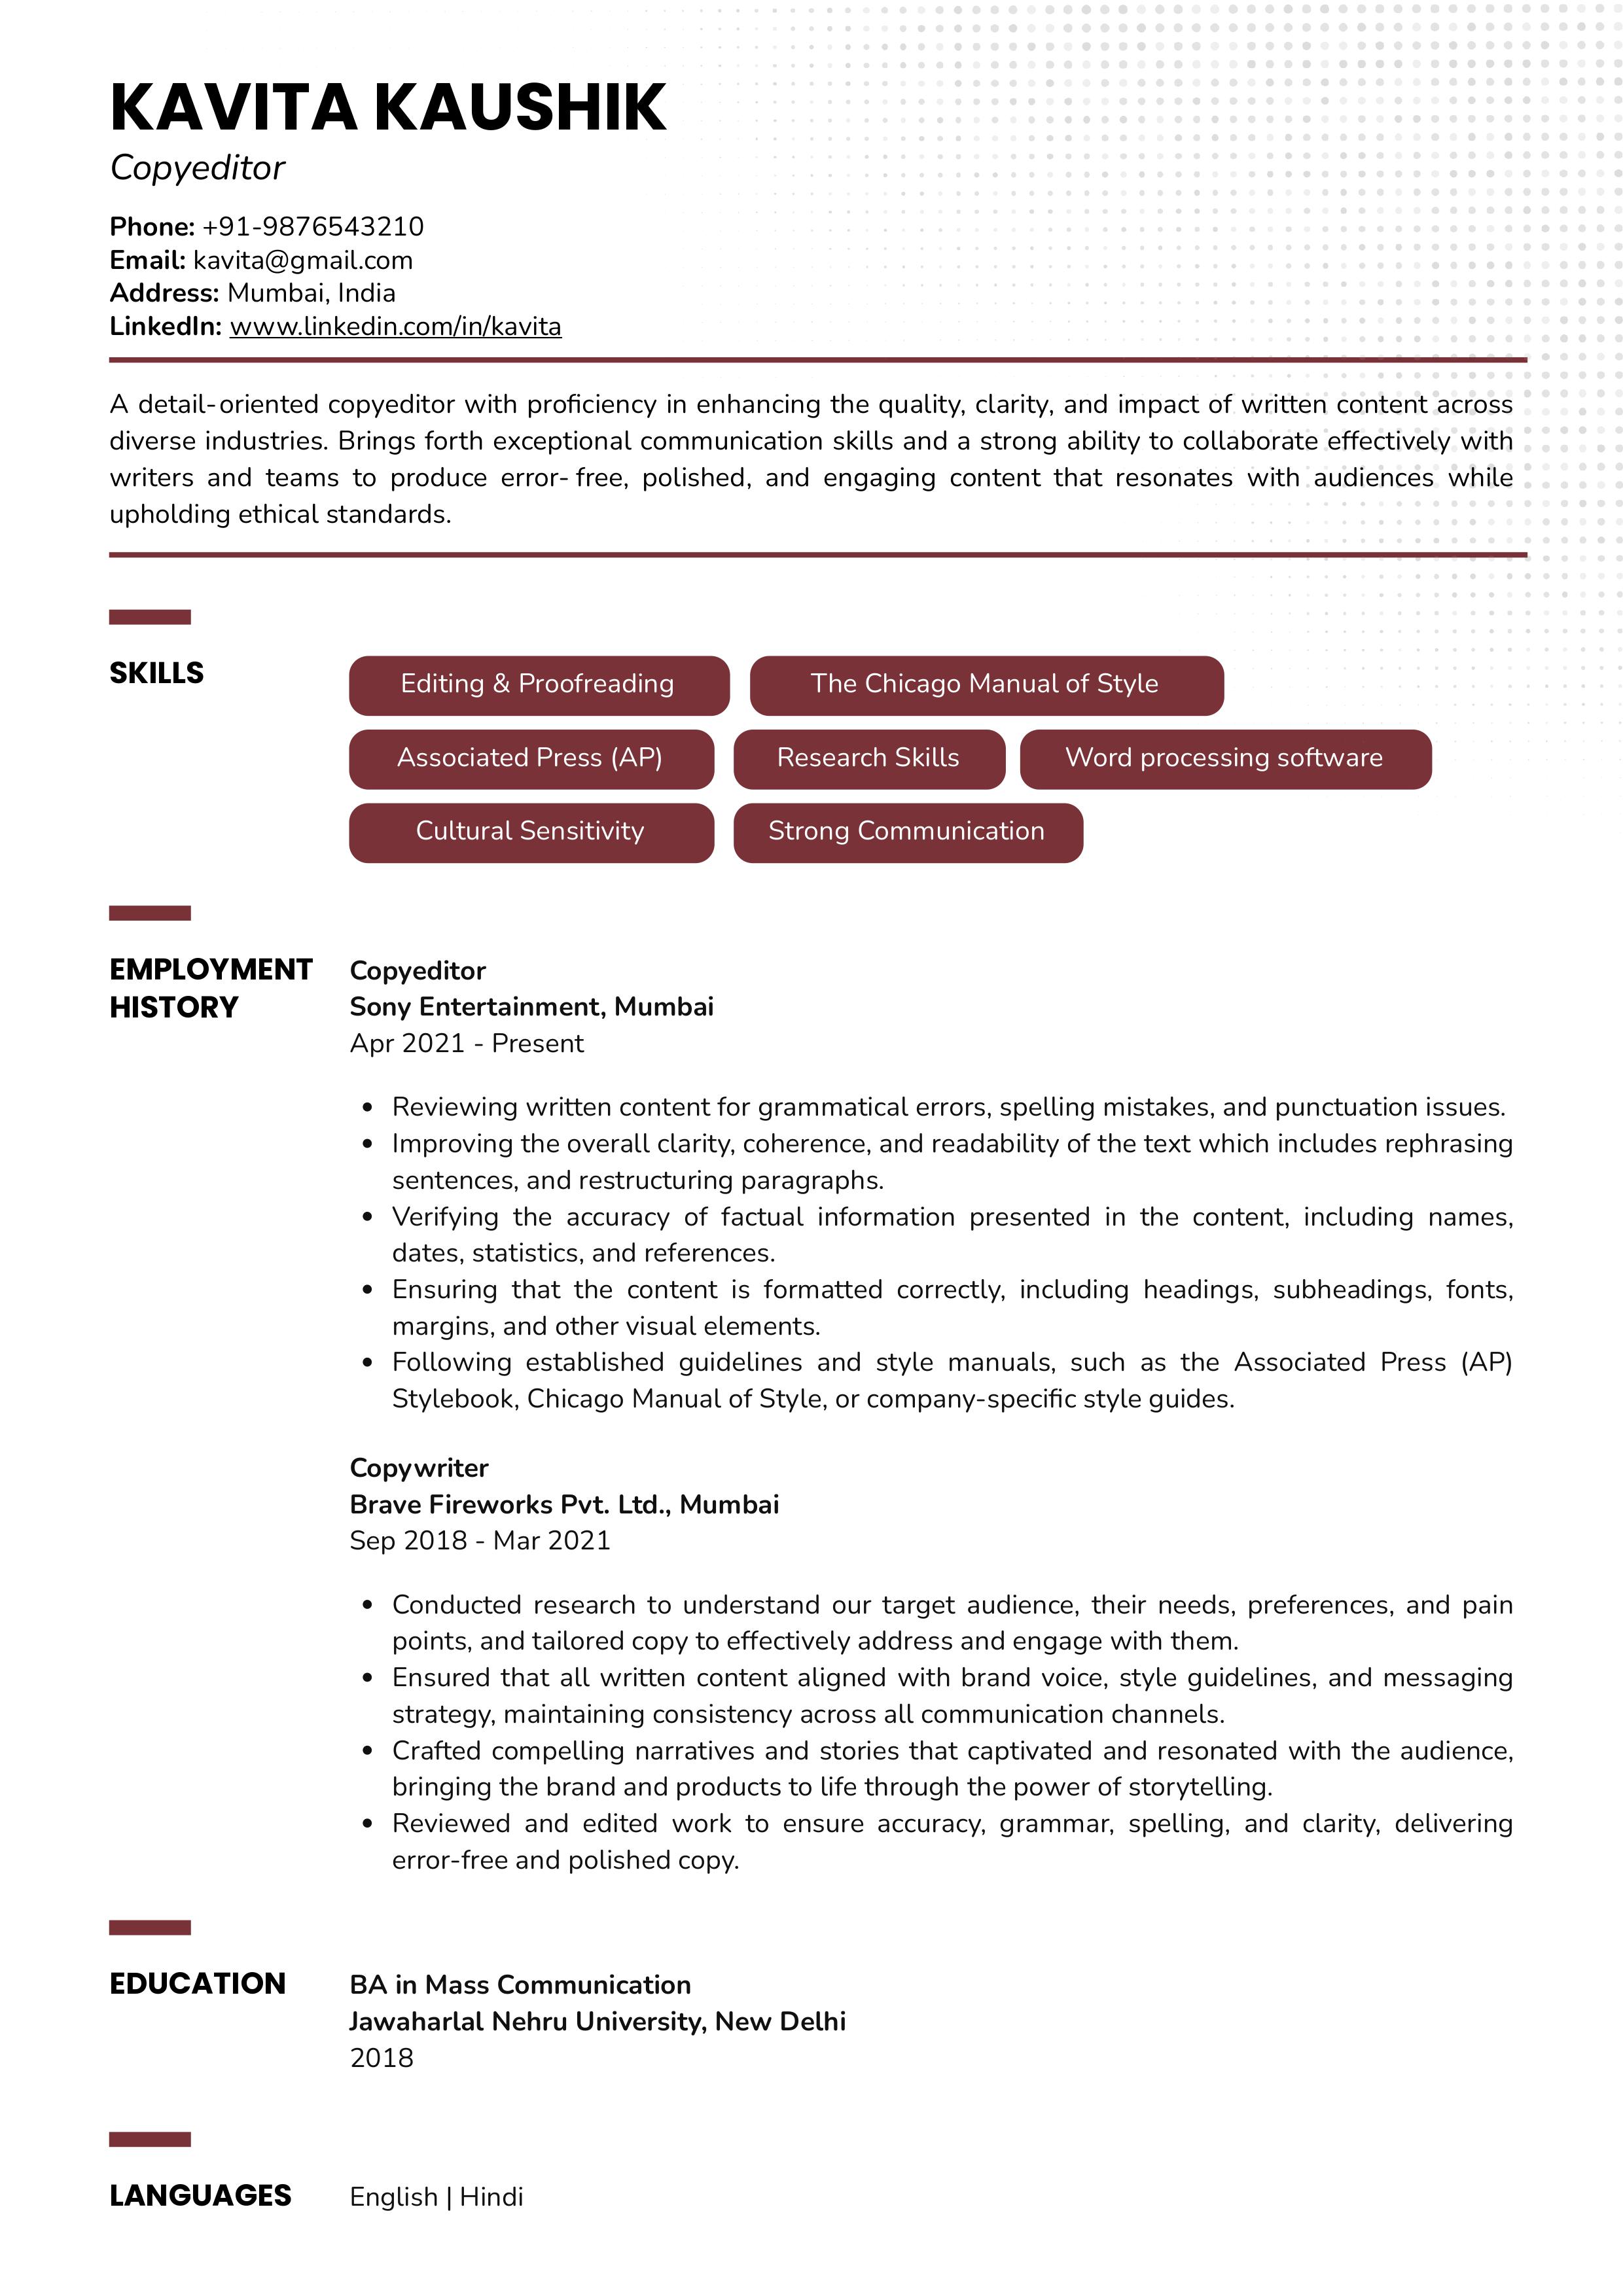 Sample Resume of Copyeditor | Free Resume Templates & Samples on Resumod.co